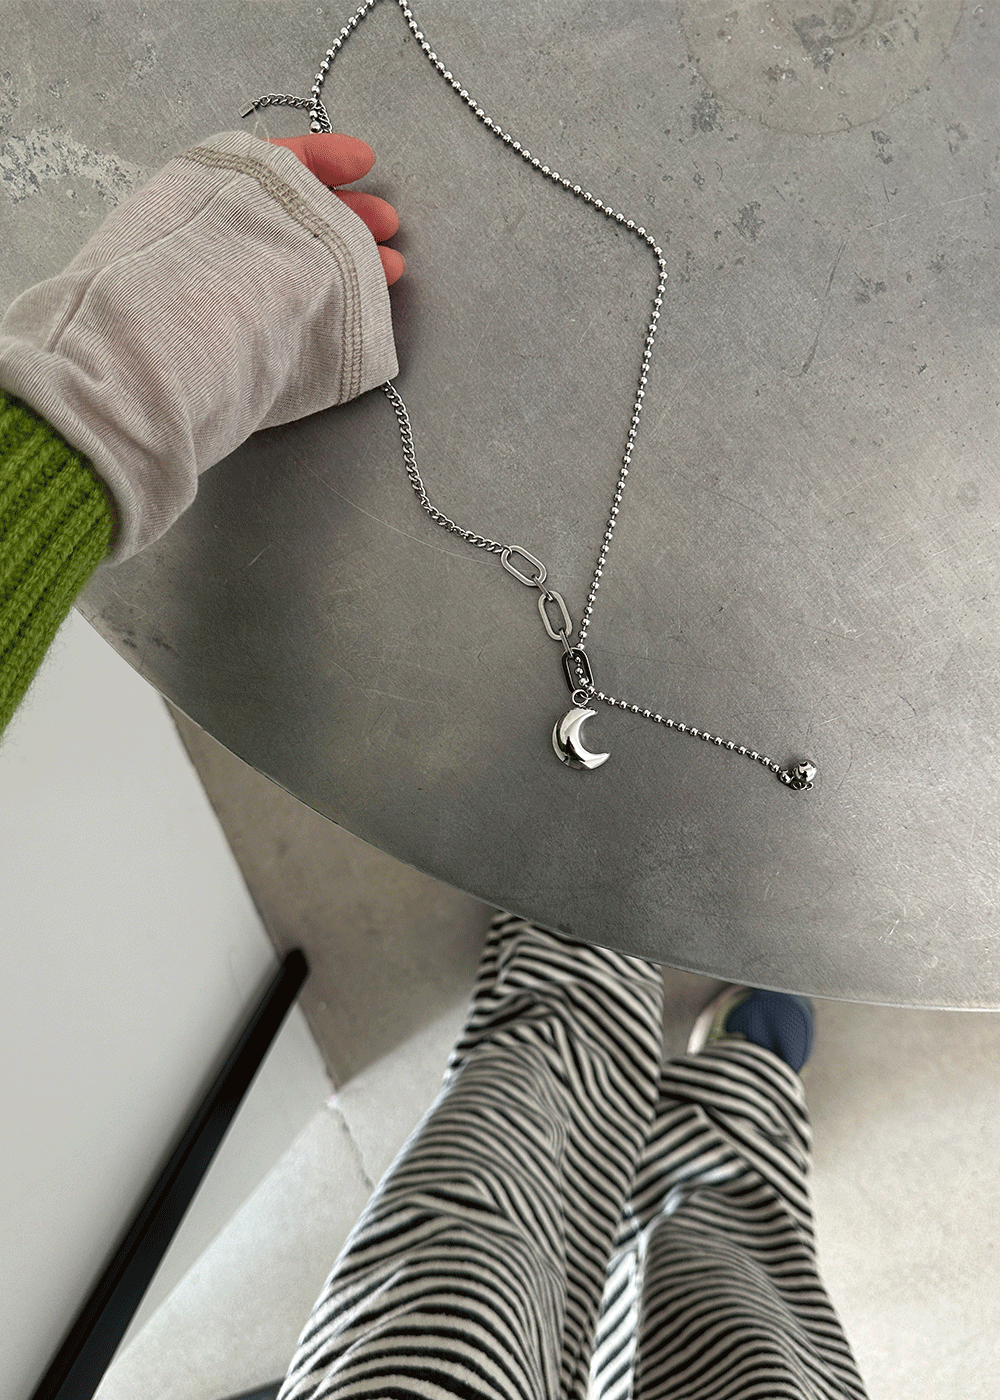 Moon surgical necklace